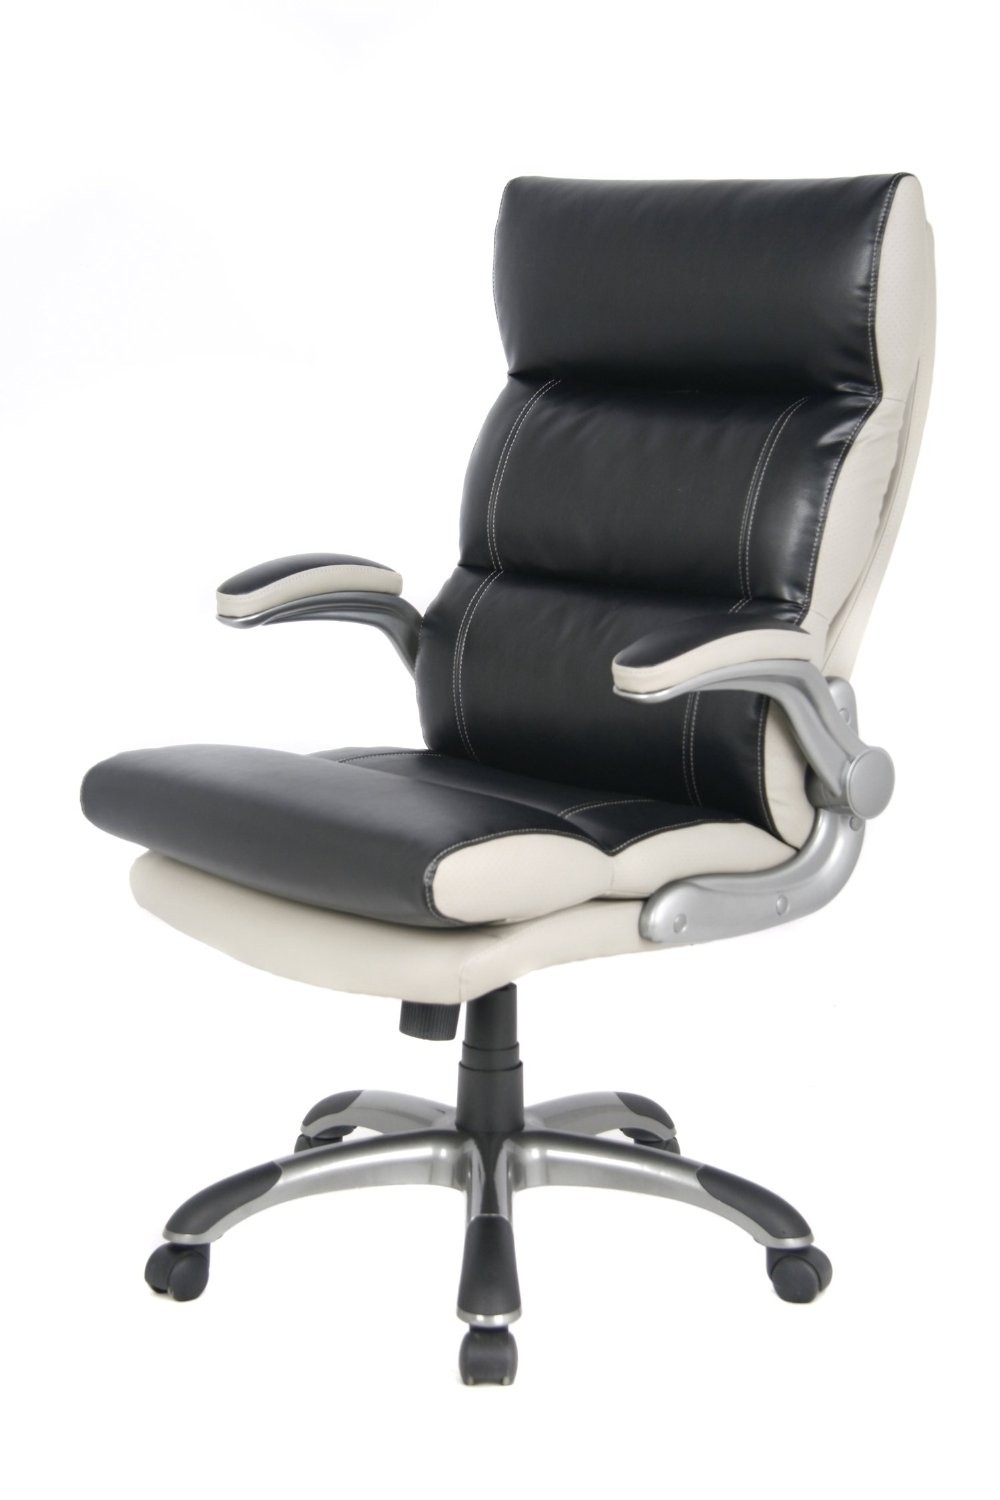 VIVA OFFICE® Comfort Luxury High-Back Black and White Bonded Leather Double Thick Padded Executive & Managerial Computer Desk Recliner Swivel Office Chair with Adjustable Armrest and Excellent Lumbar Support-Viva0502L1